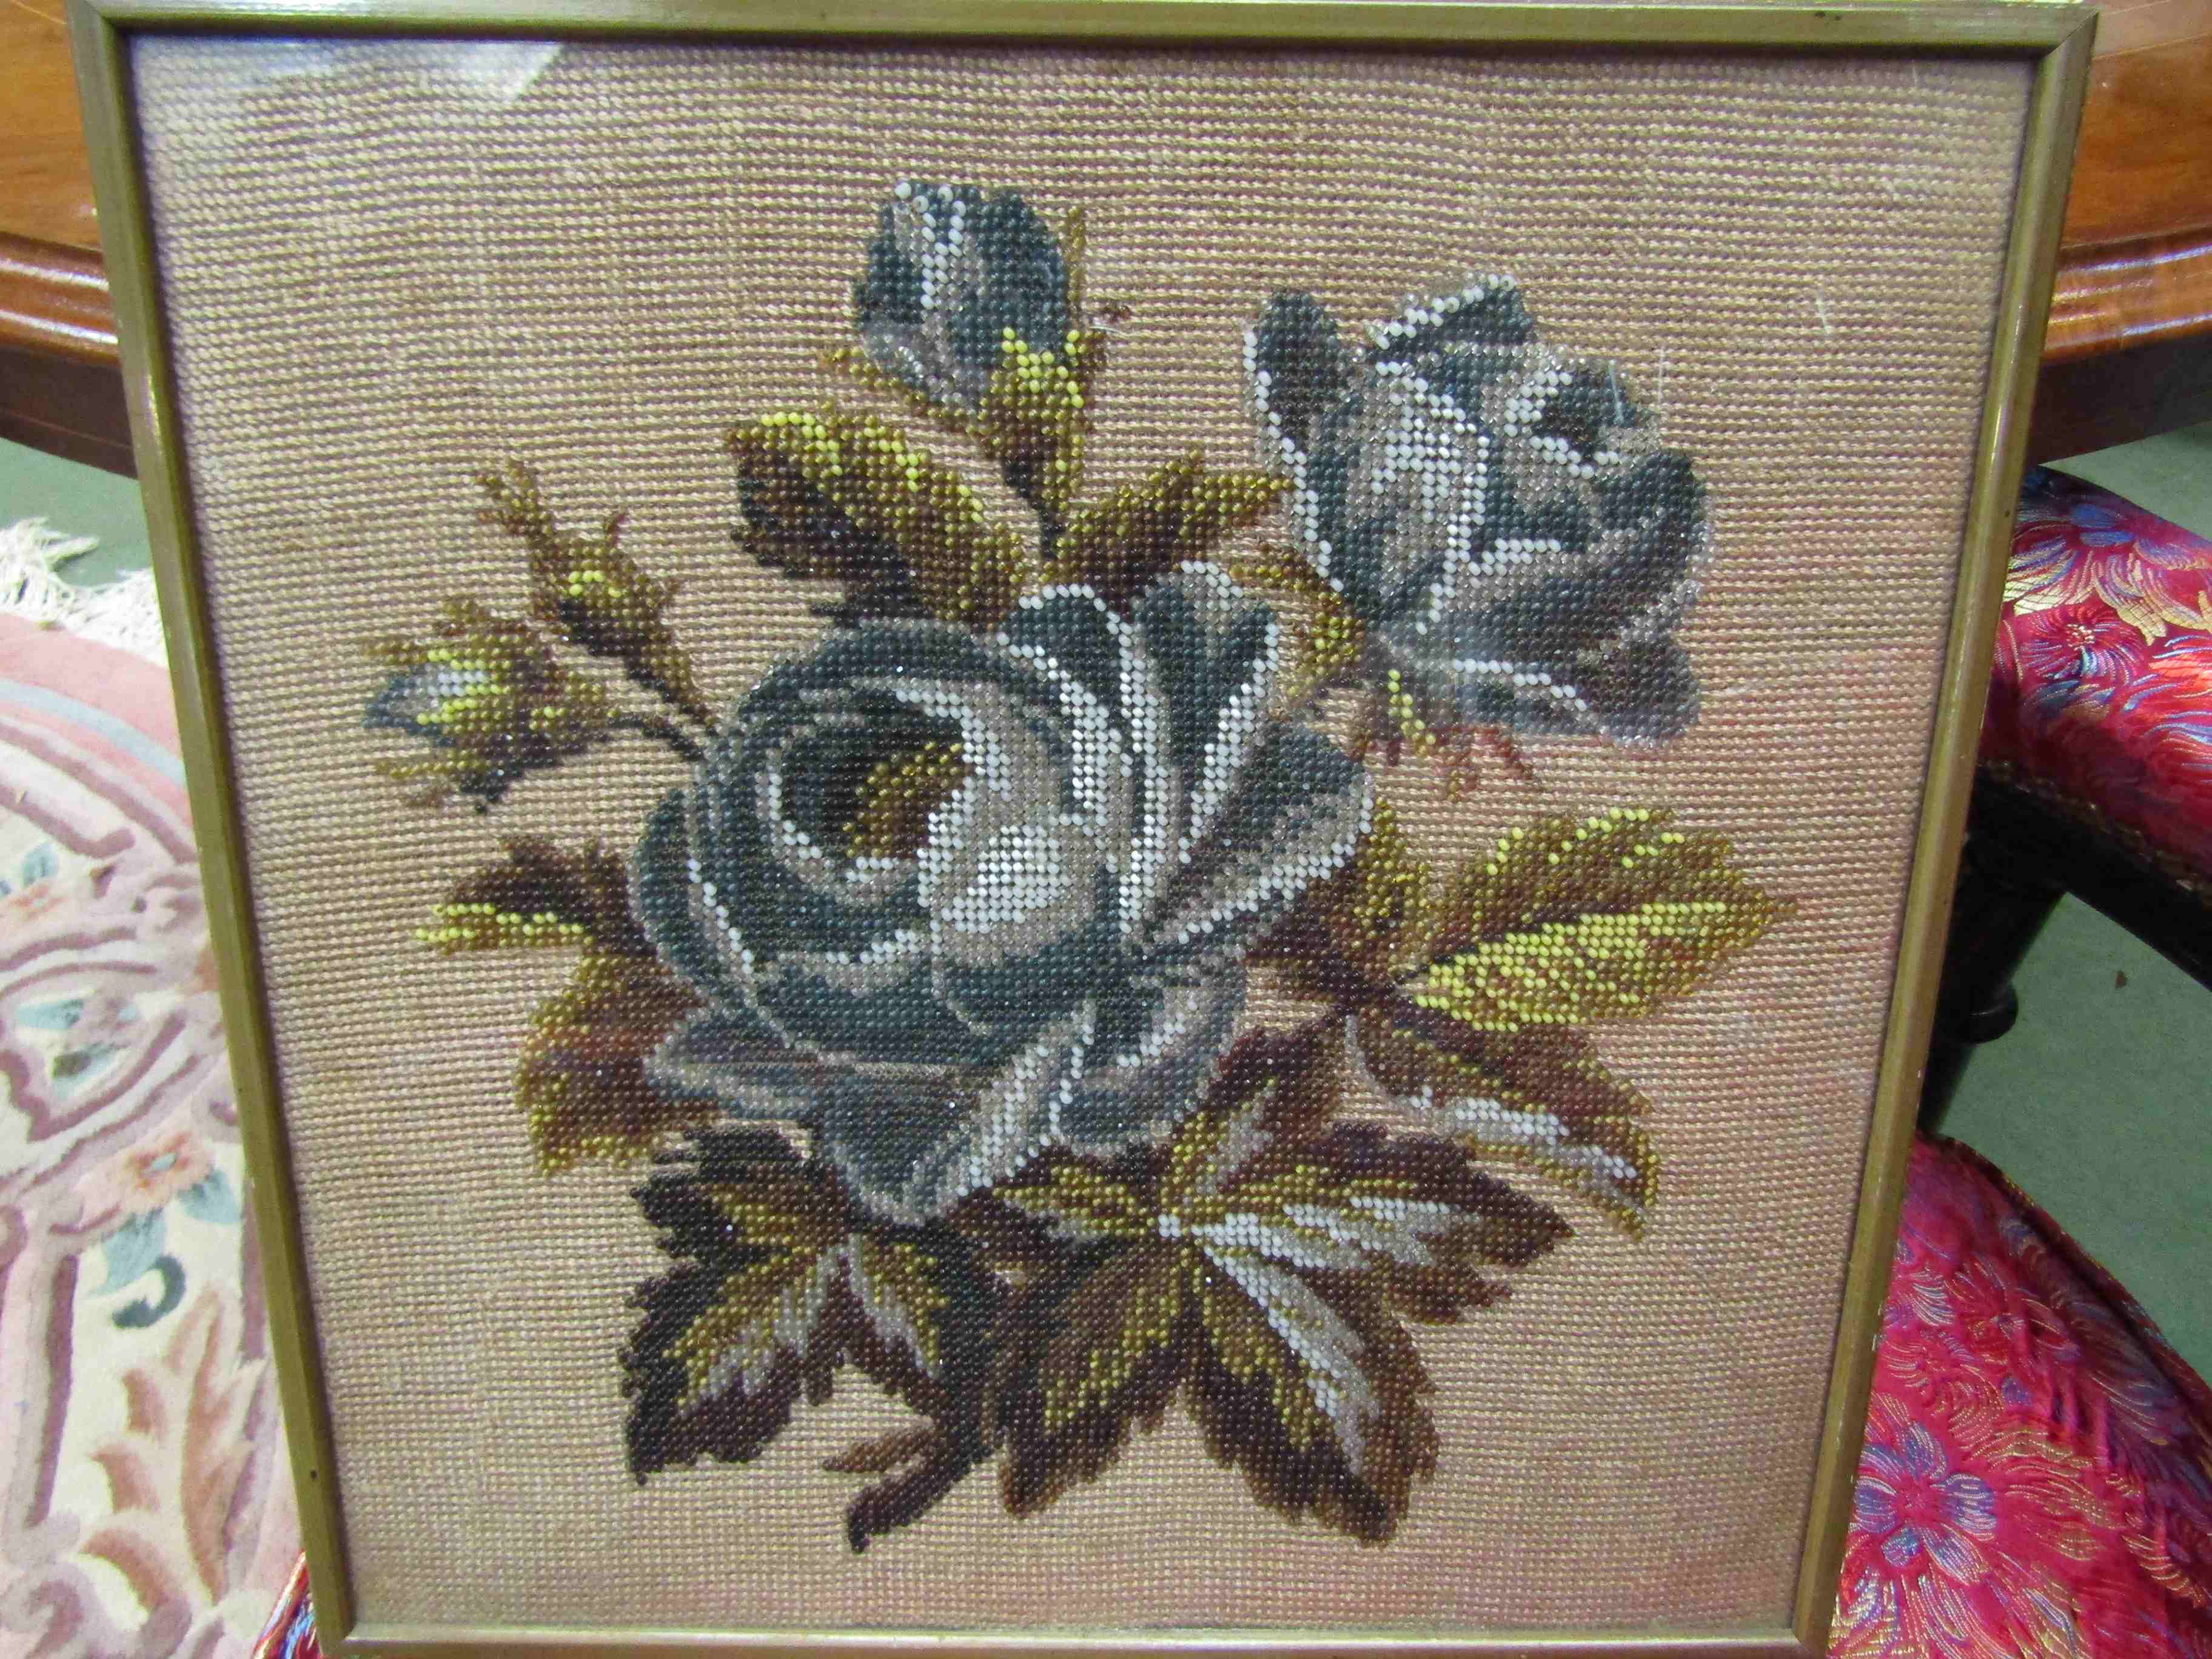 A beadwork picture of floral specimens,